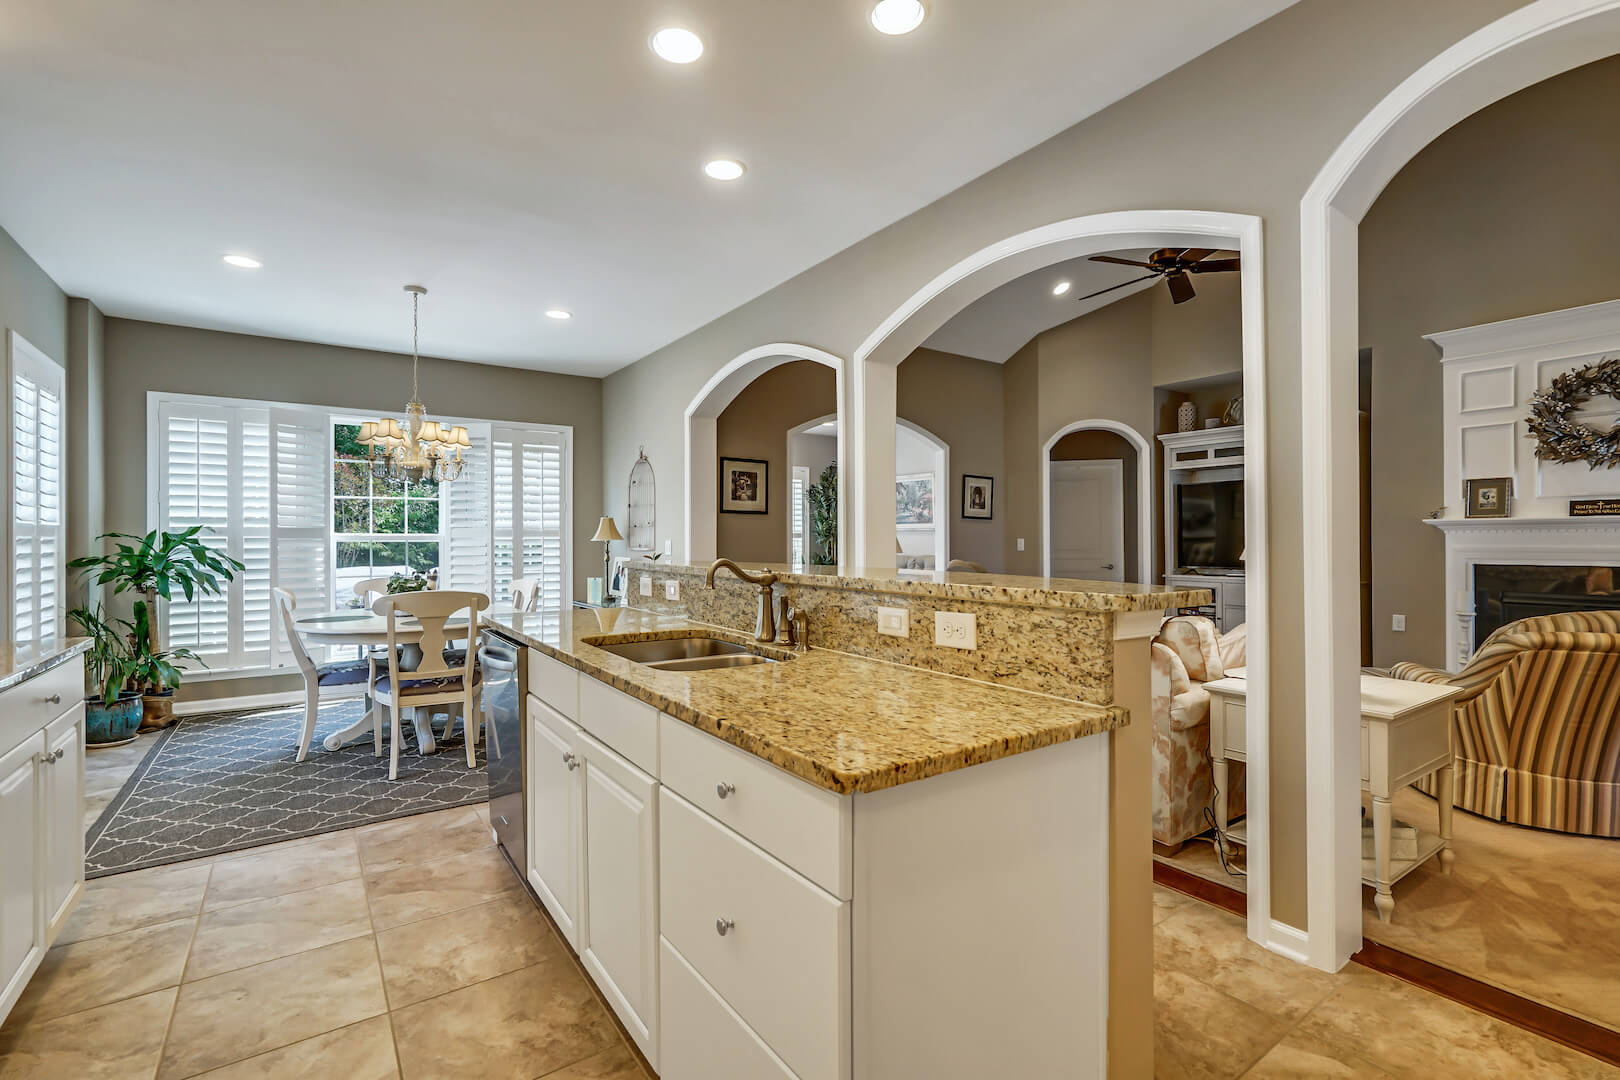 After-Equestra Retirement Community Kitchen